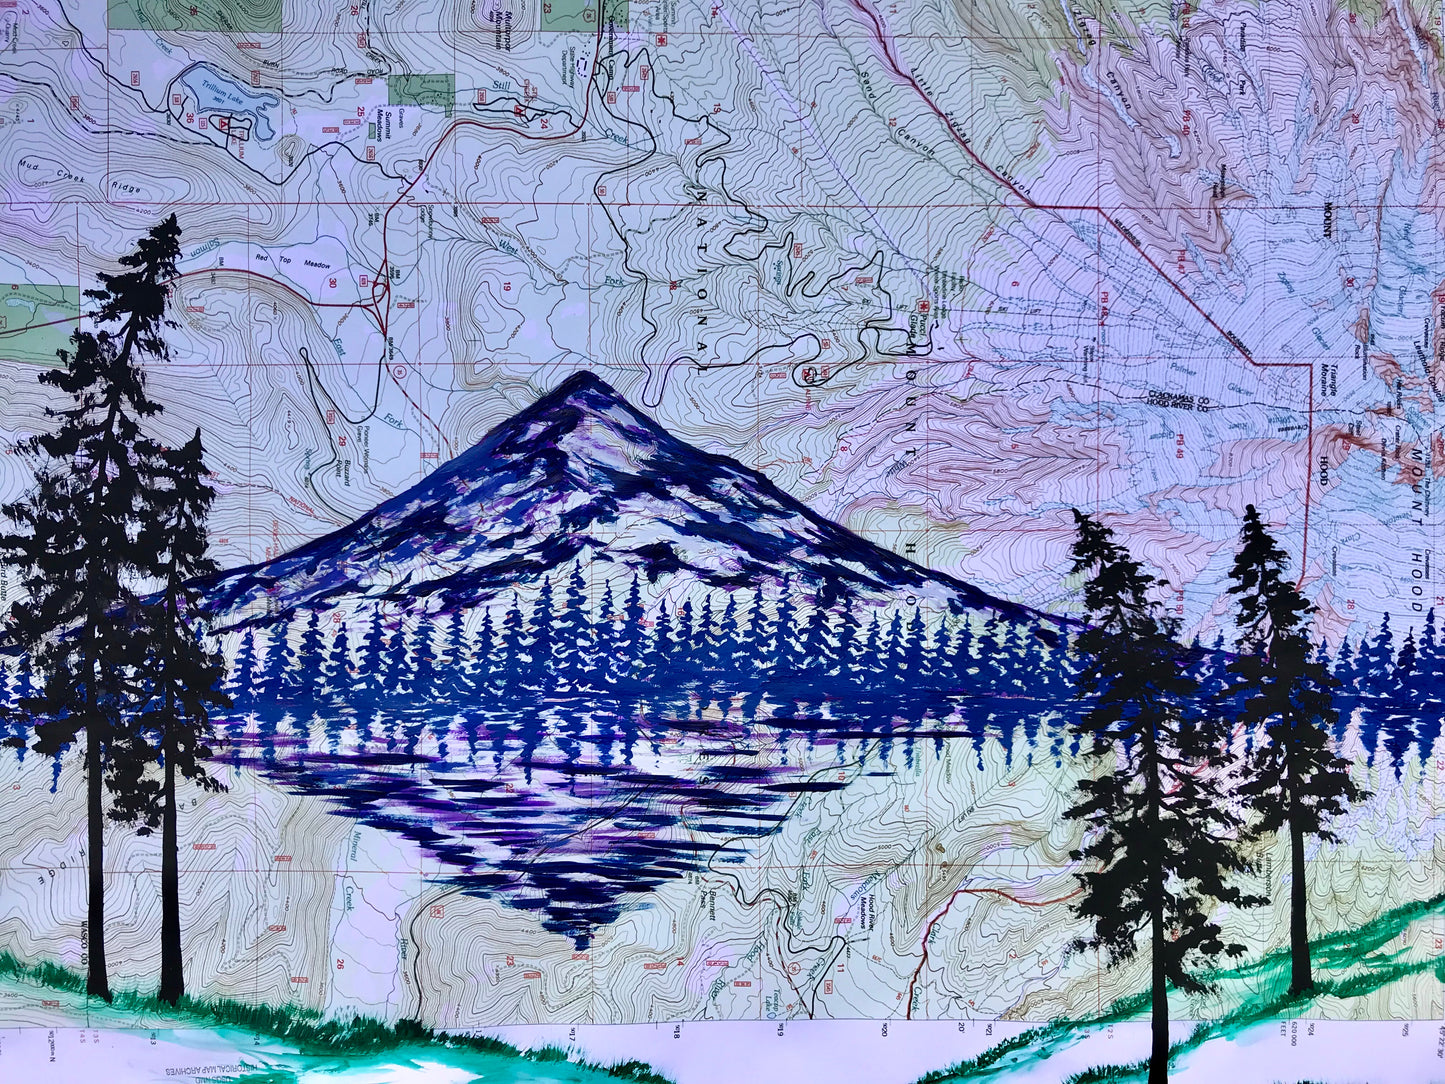 Mt Hood topographic map painting